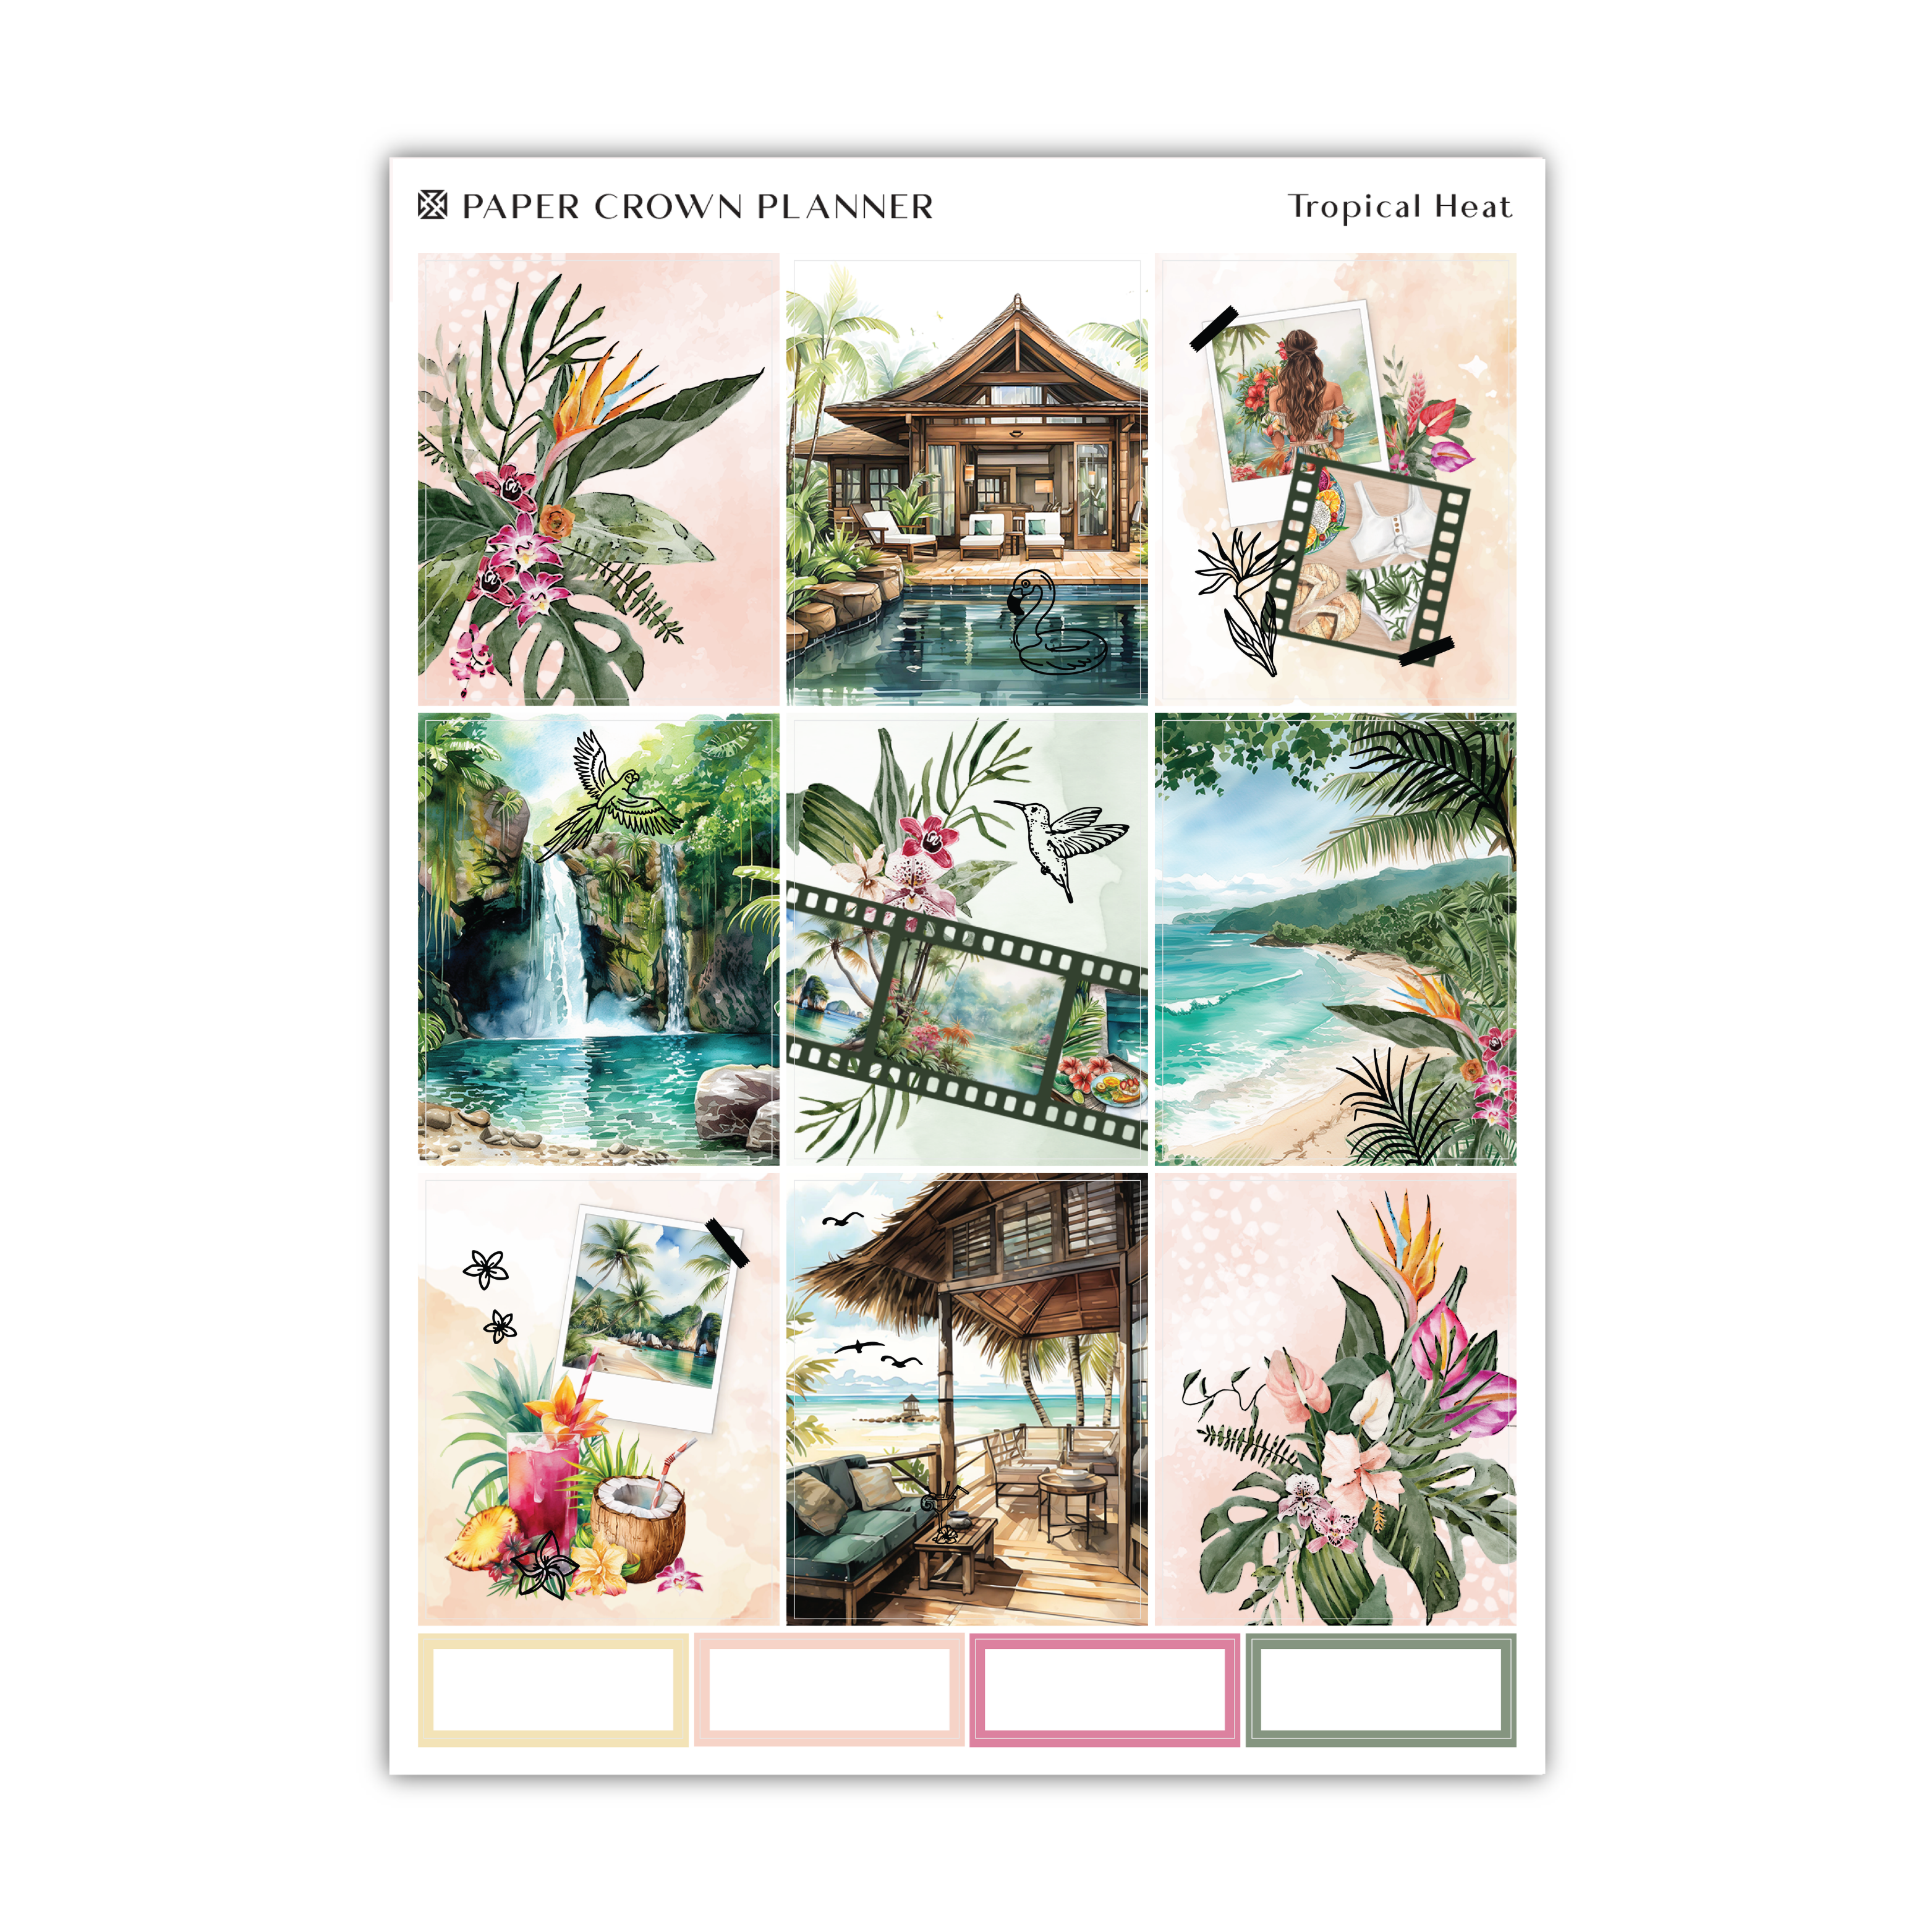 a paper crown planner with tropical scenes